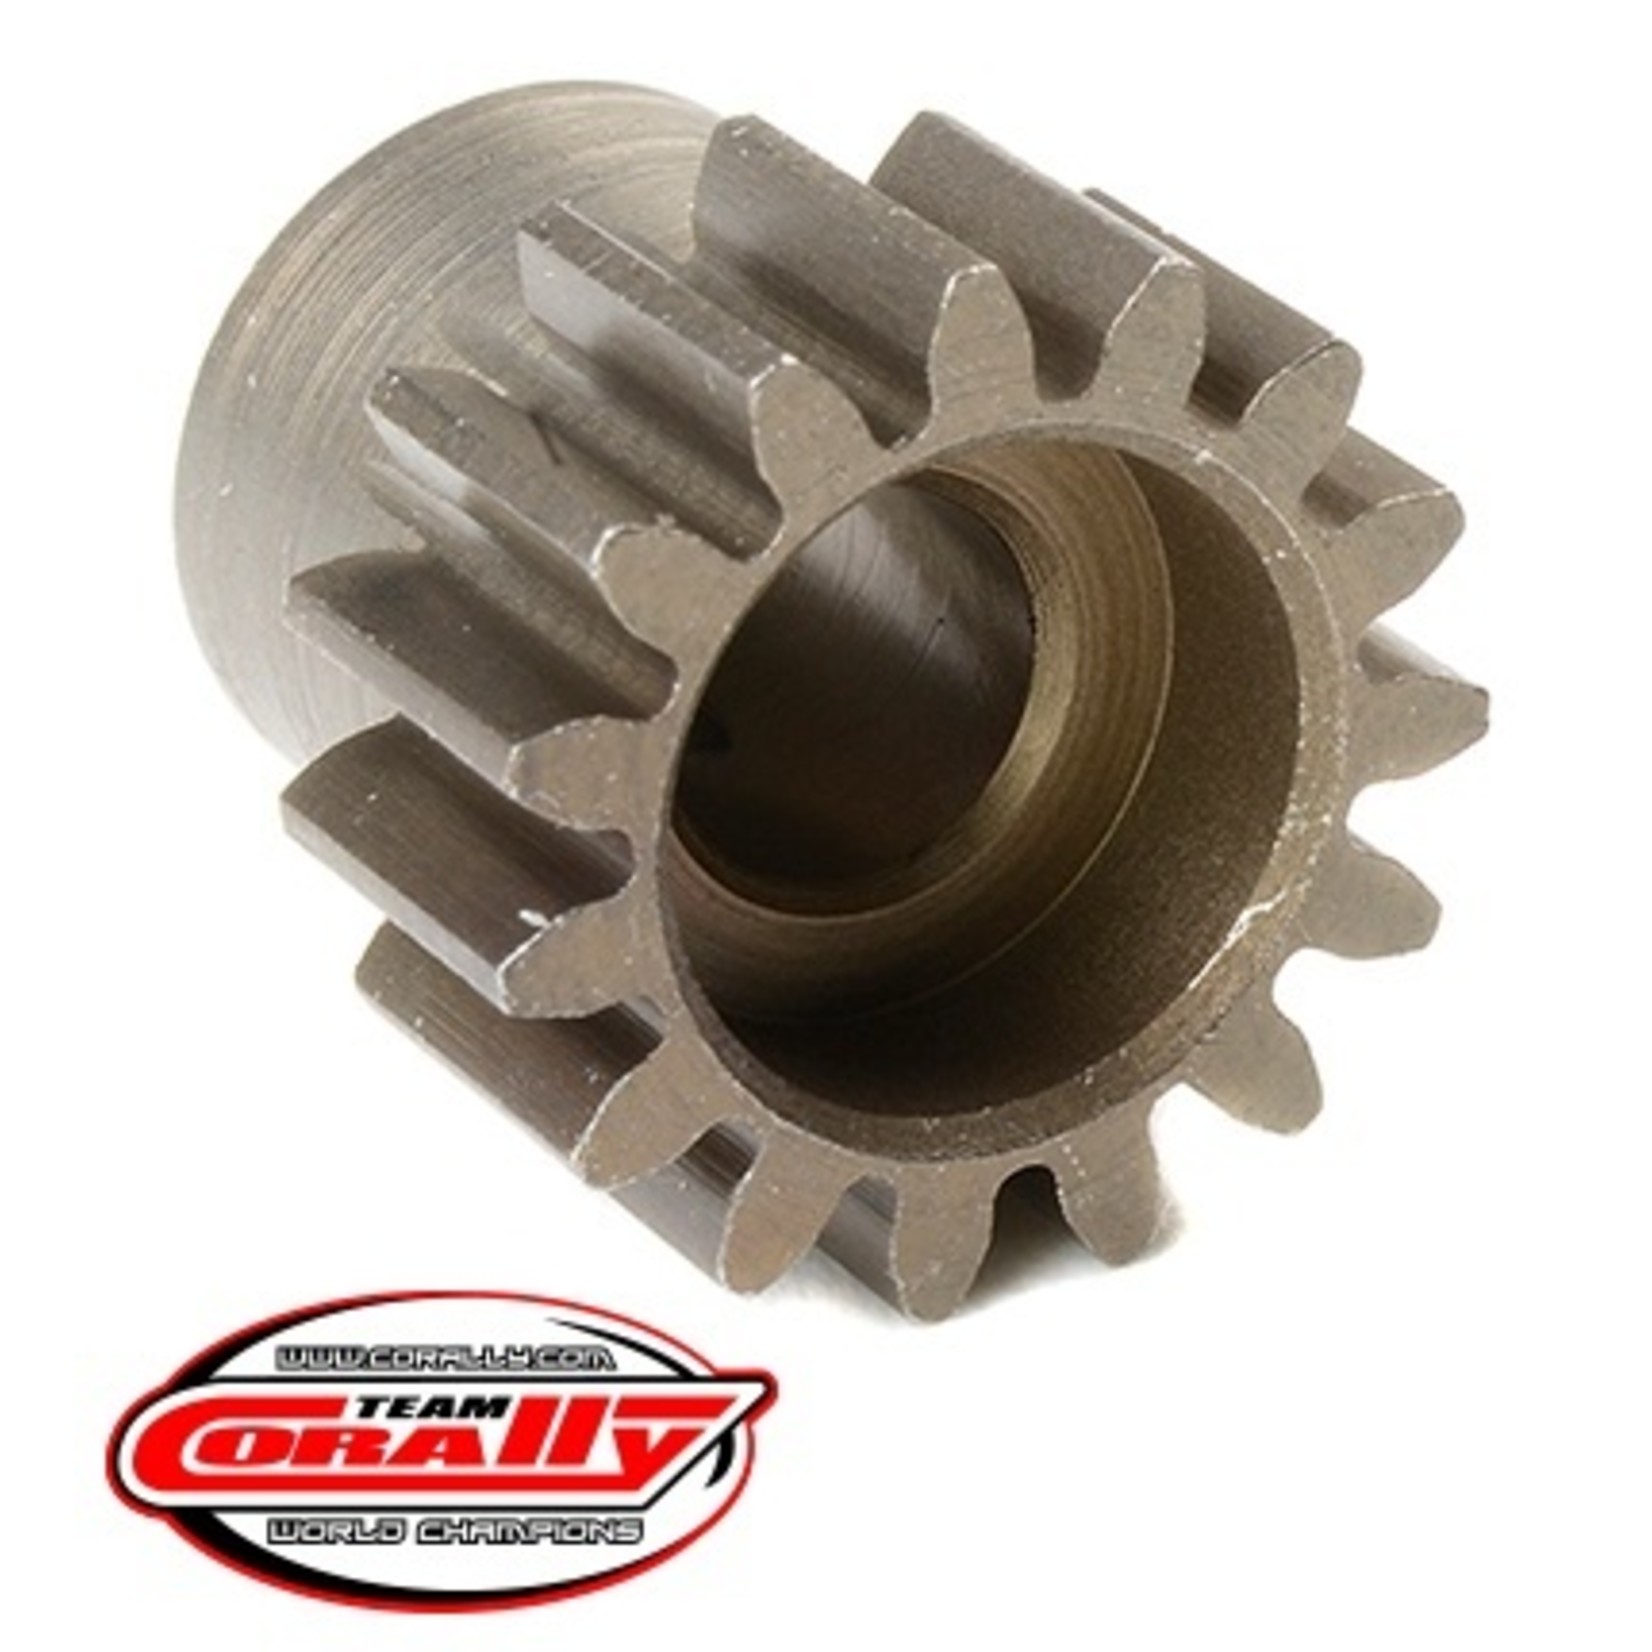 Corally (Team Corally) 32 Pitch Pinion - Short - Hardened Steel - 15 Tooth -